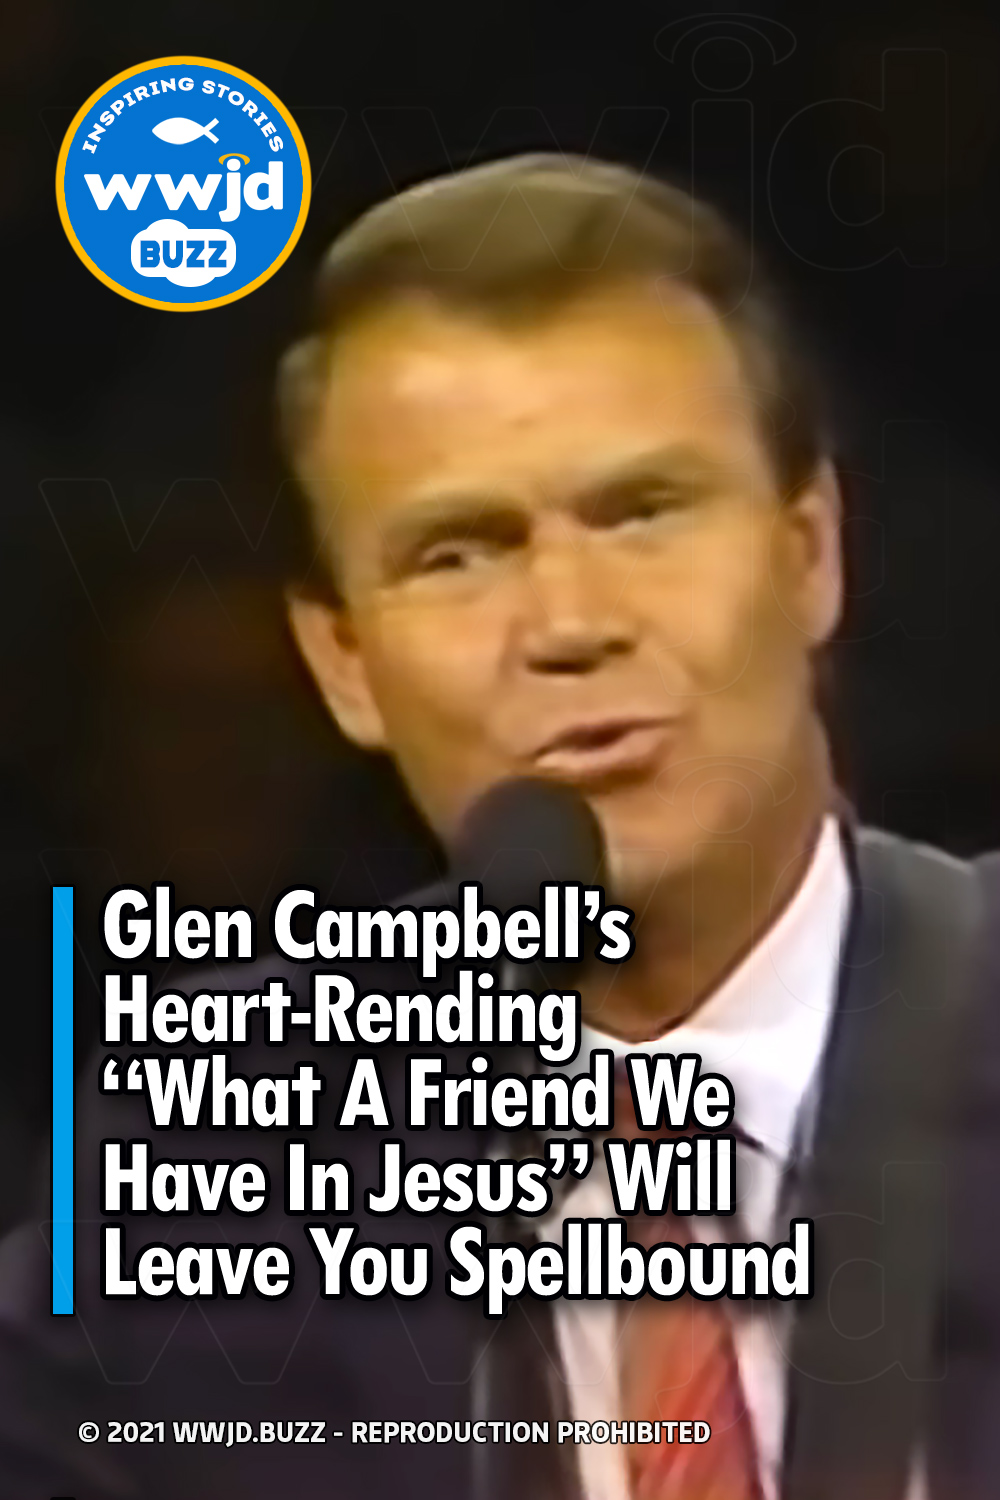 Glen Campbell’s Heart-Rending “What A Friend We Have In Jesus” Will Leave You Spellbound